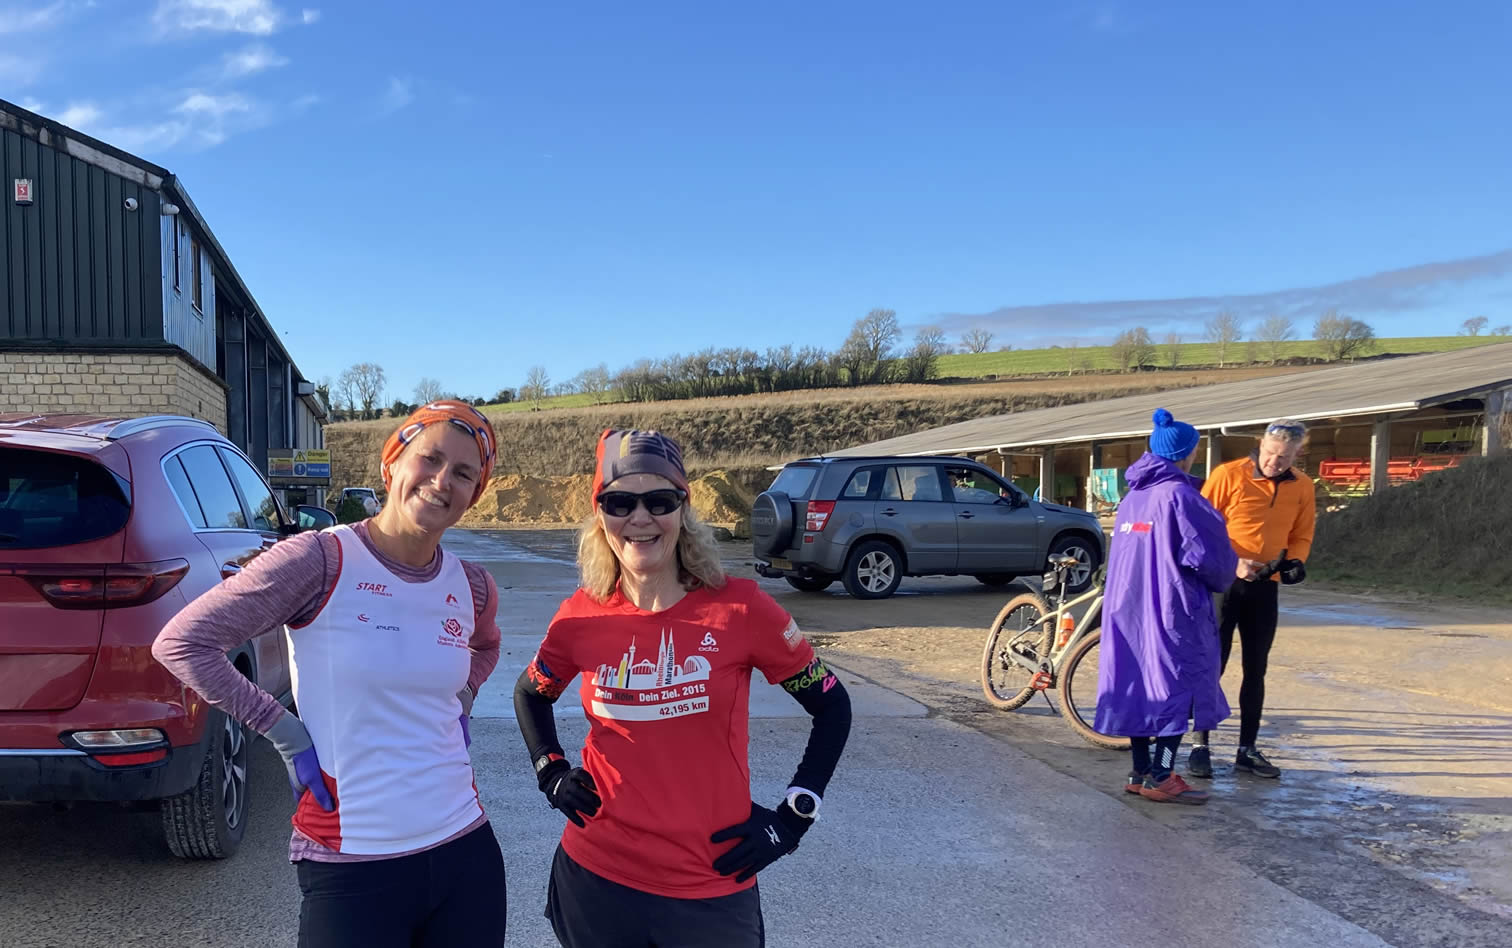 Lucy and Susan at BRR Social Relay, Guiting Power - 2nd January 2023